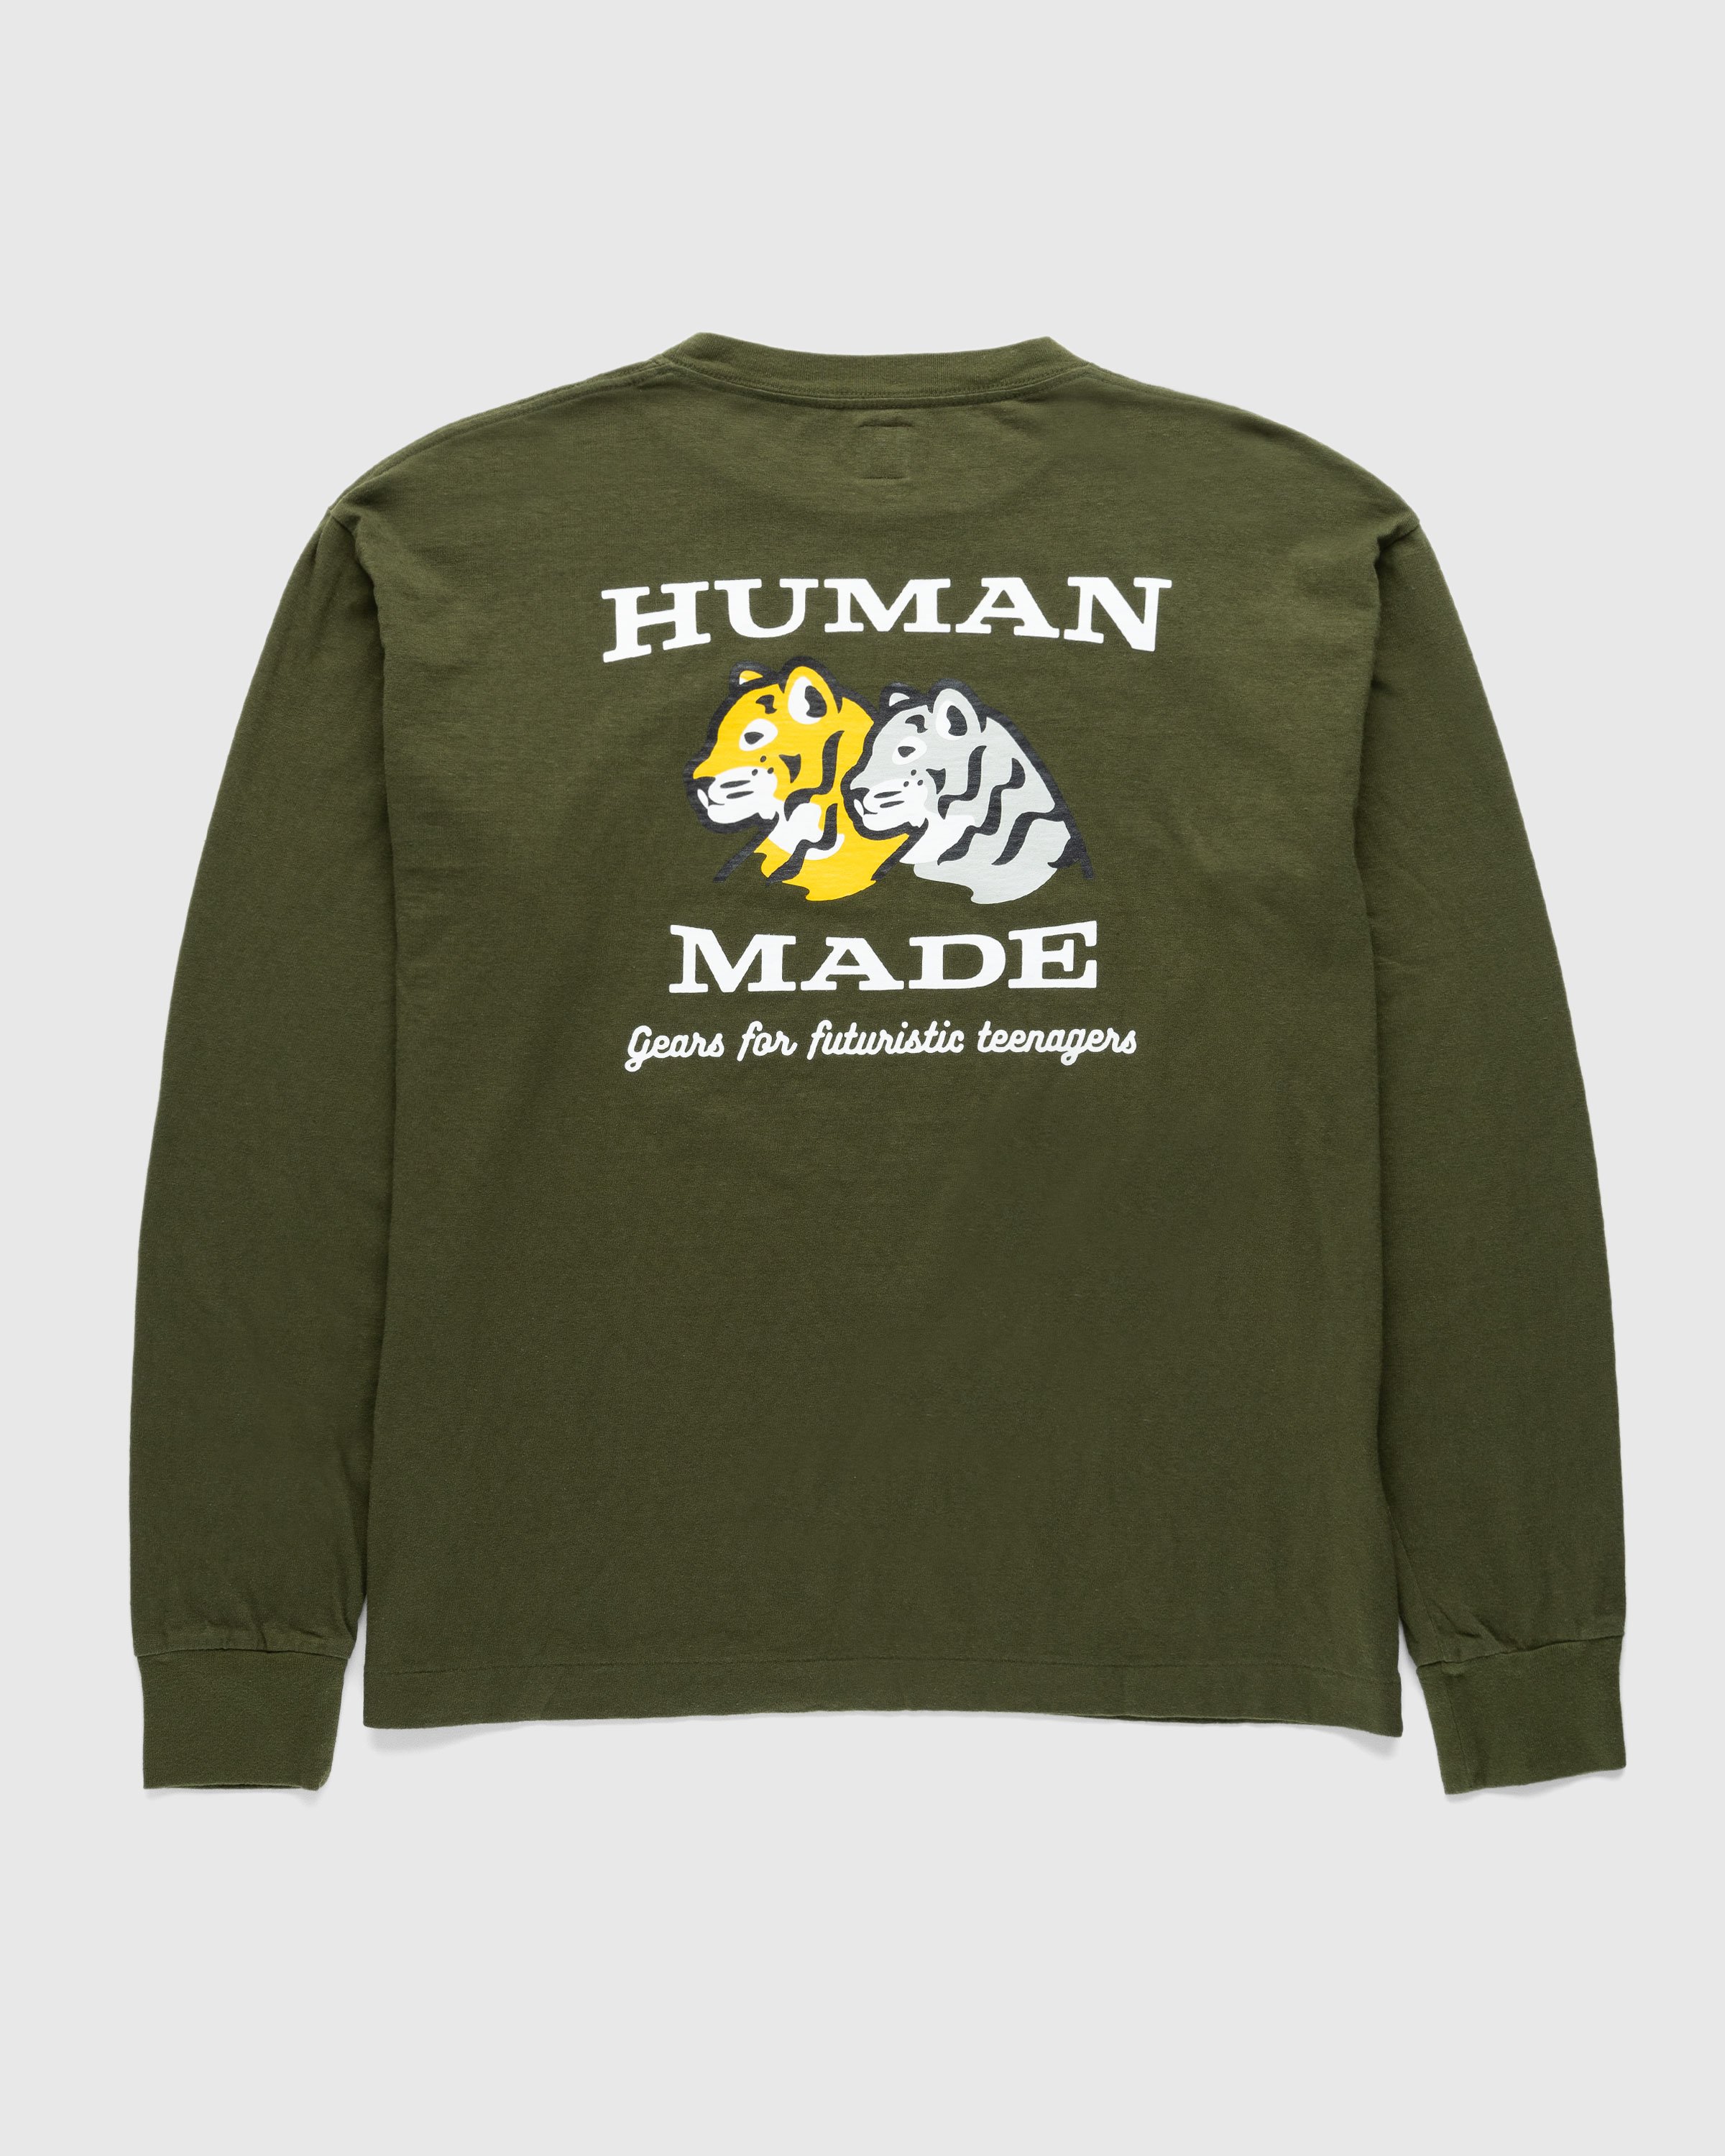 Human Made - GRAPHIC L/S T-SHIRT #1 Olive Drab - Clothing - Green - Image 2